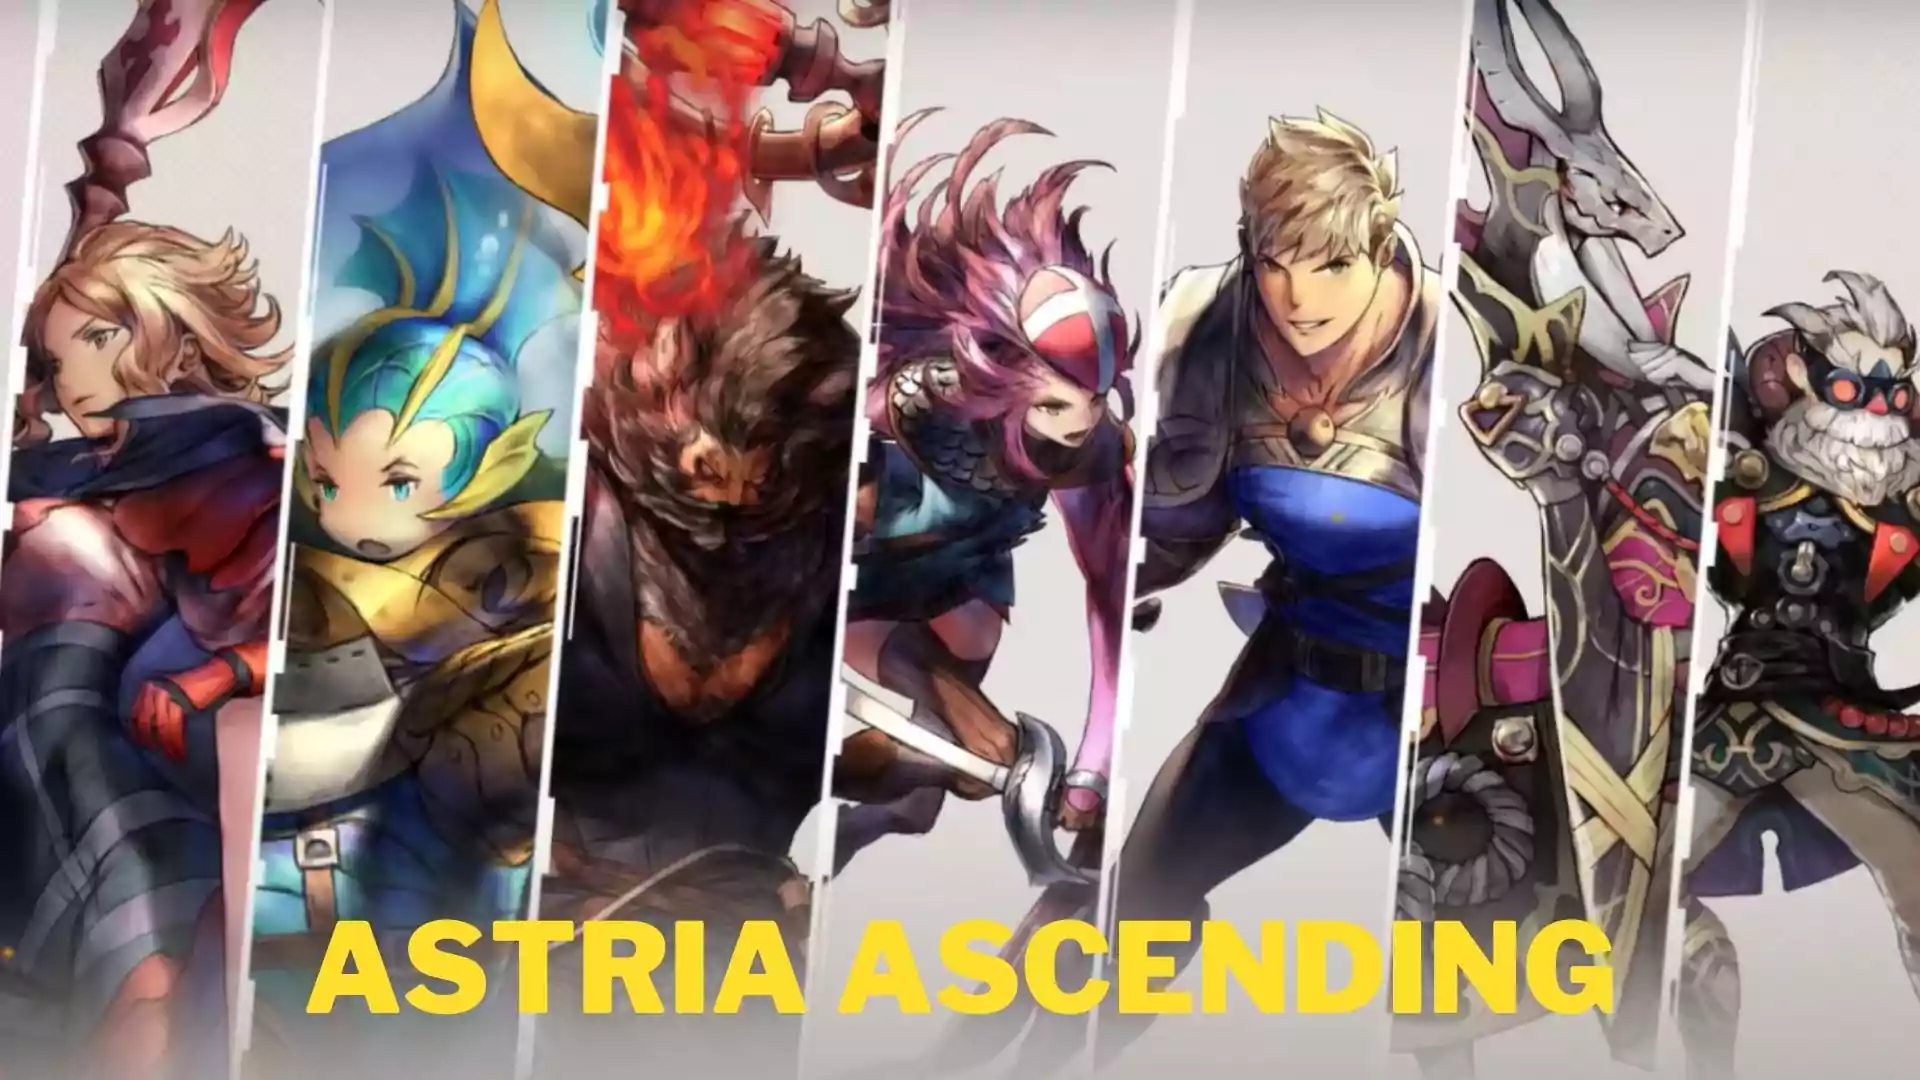 Astria Ascending Parents Guide and Age Rating